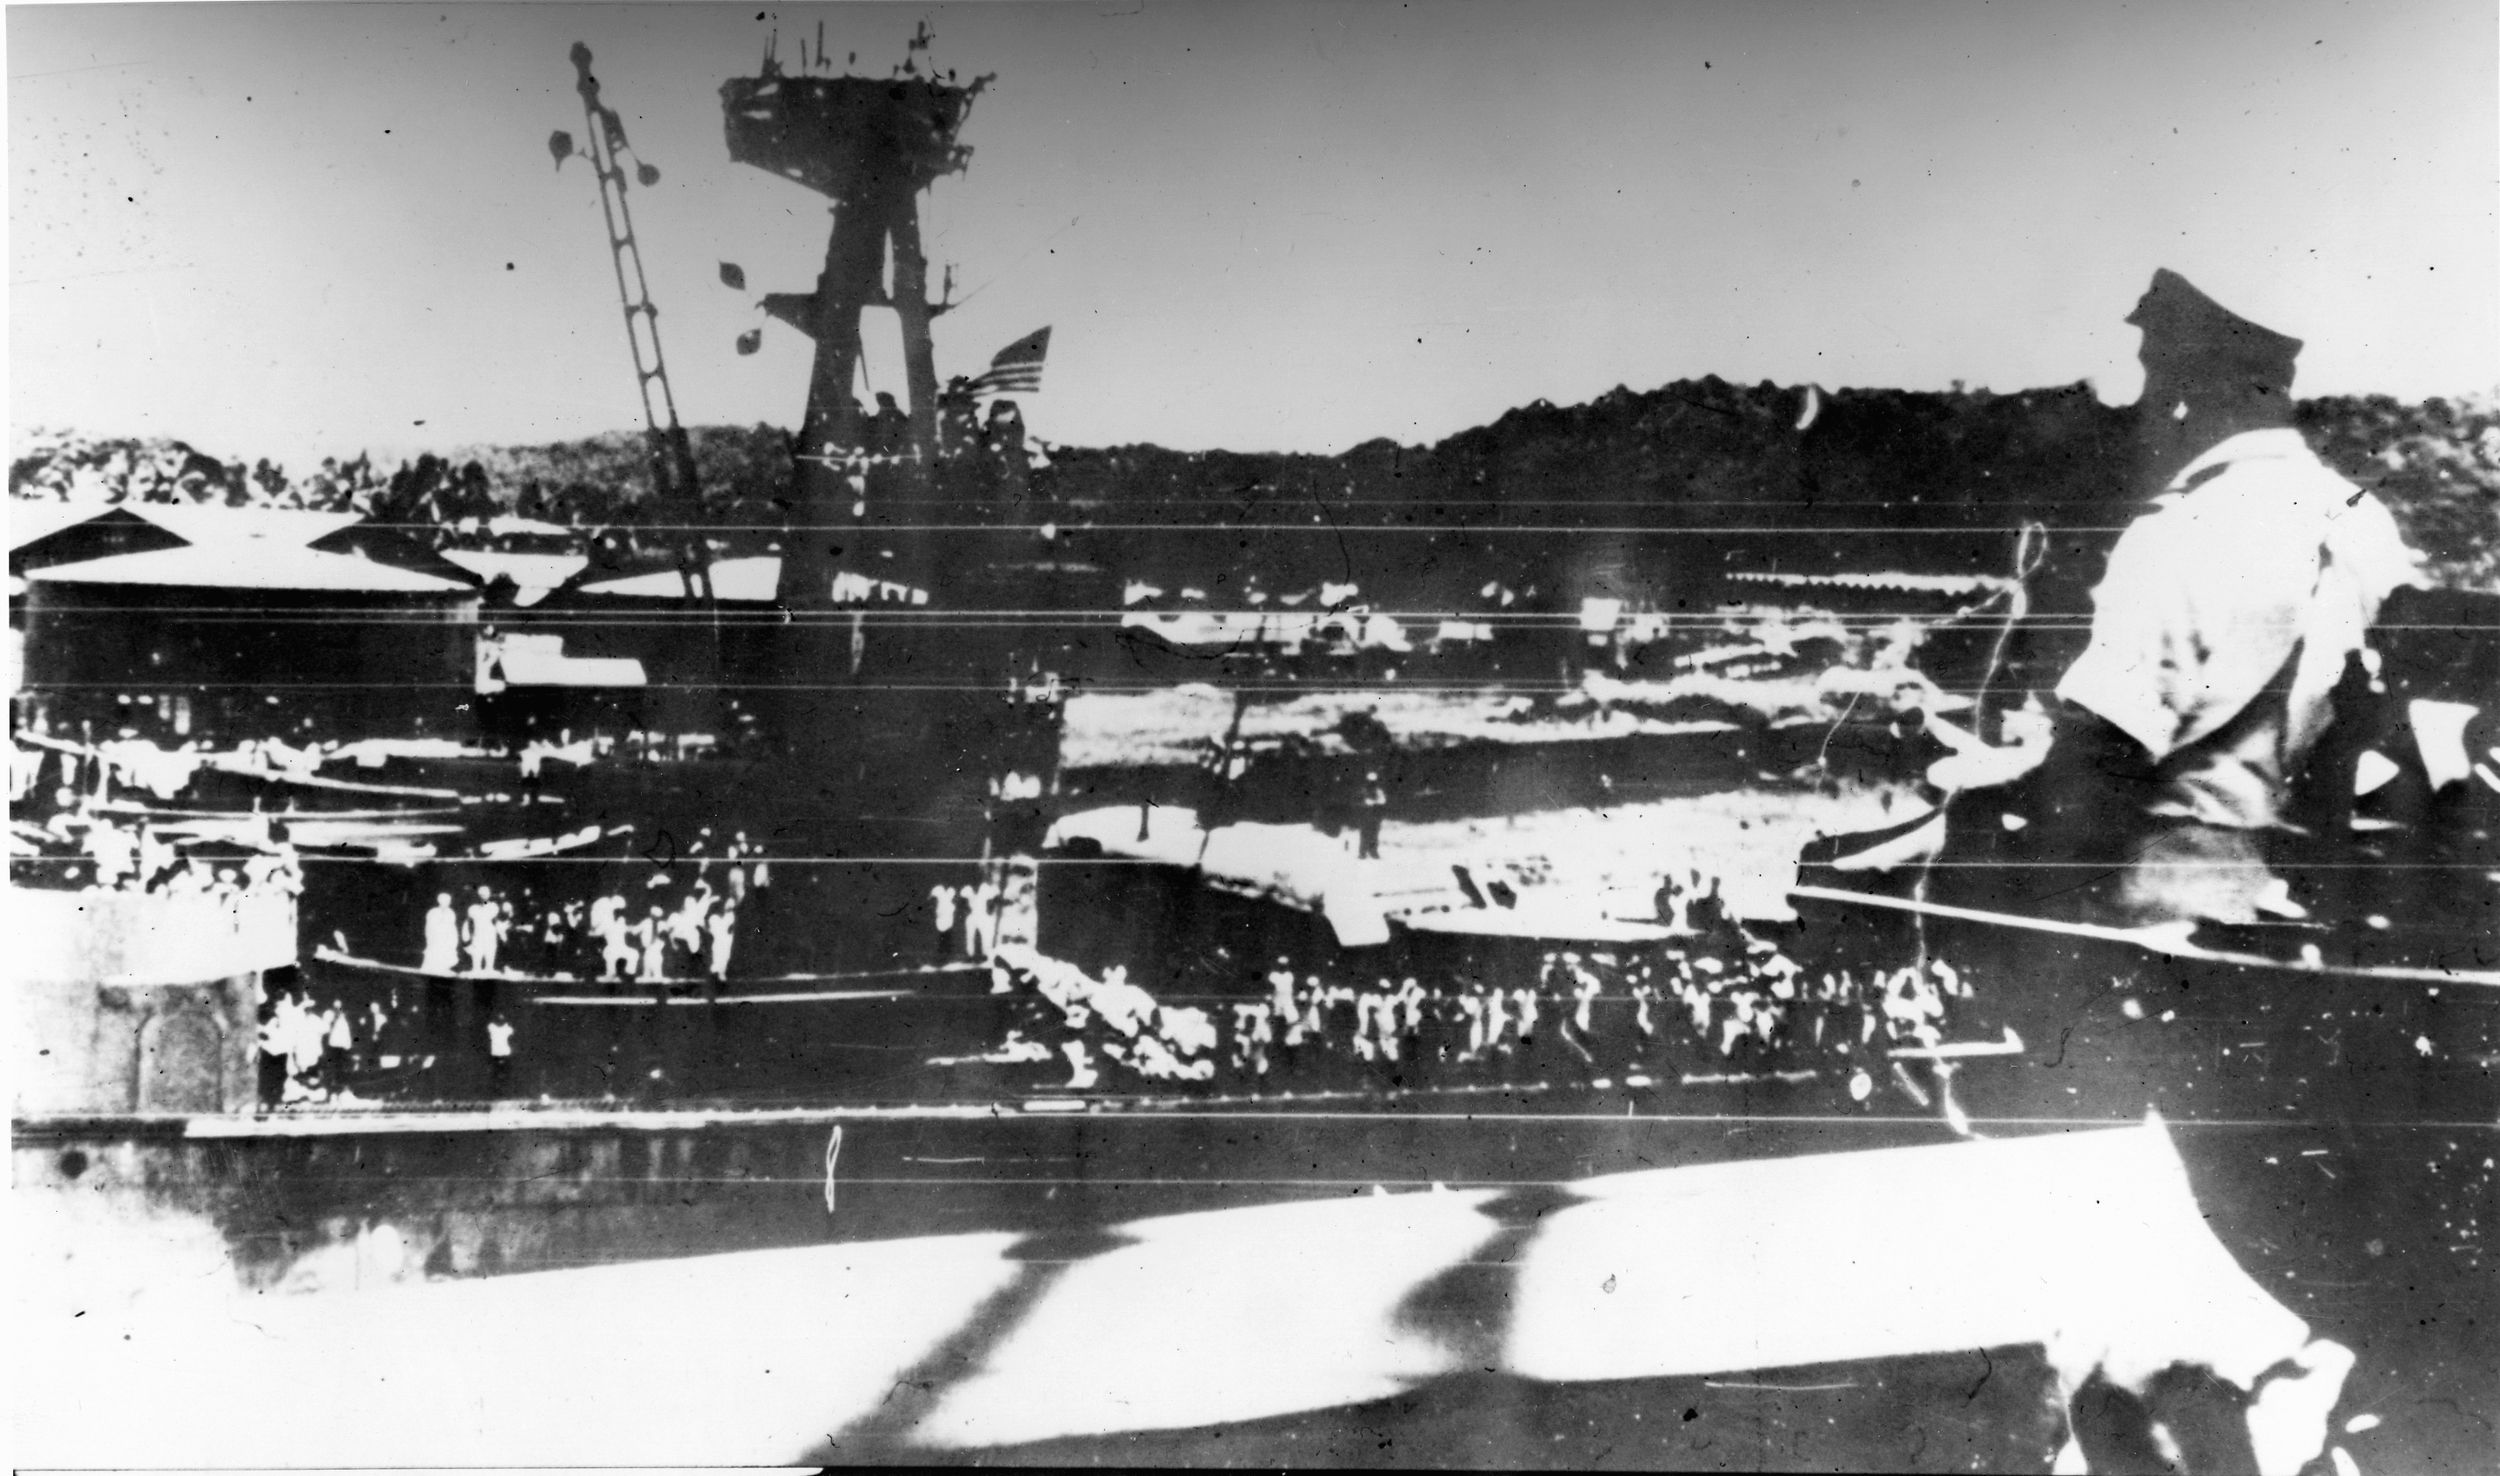 In a photo taken from the USS Marblehead, Houston sails the waters at Tjilajap, Java, on February 6, 1942—less than month before she went down at Sunda Strait.